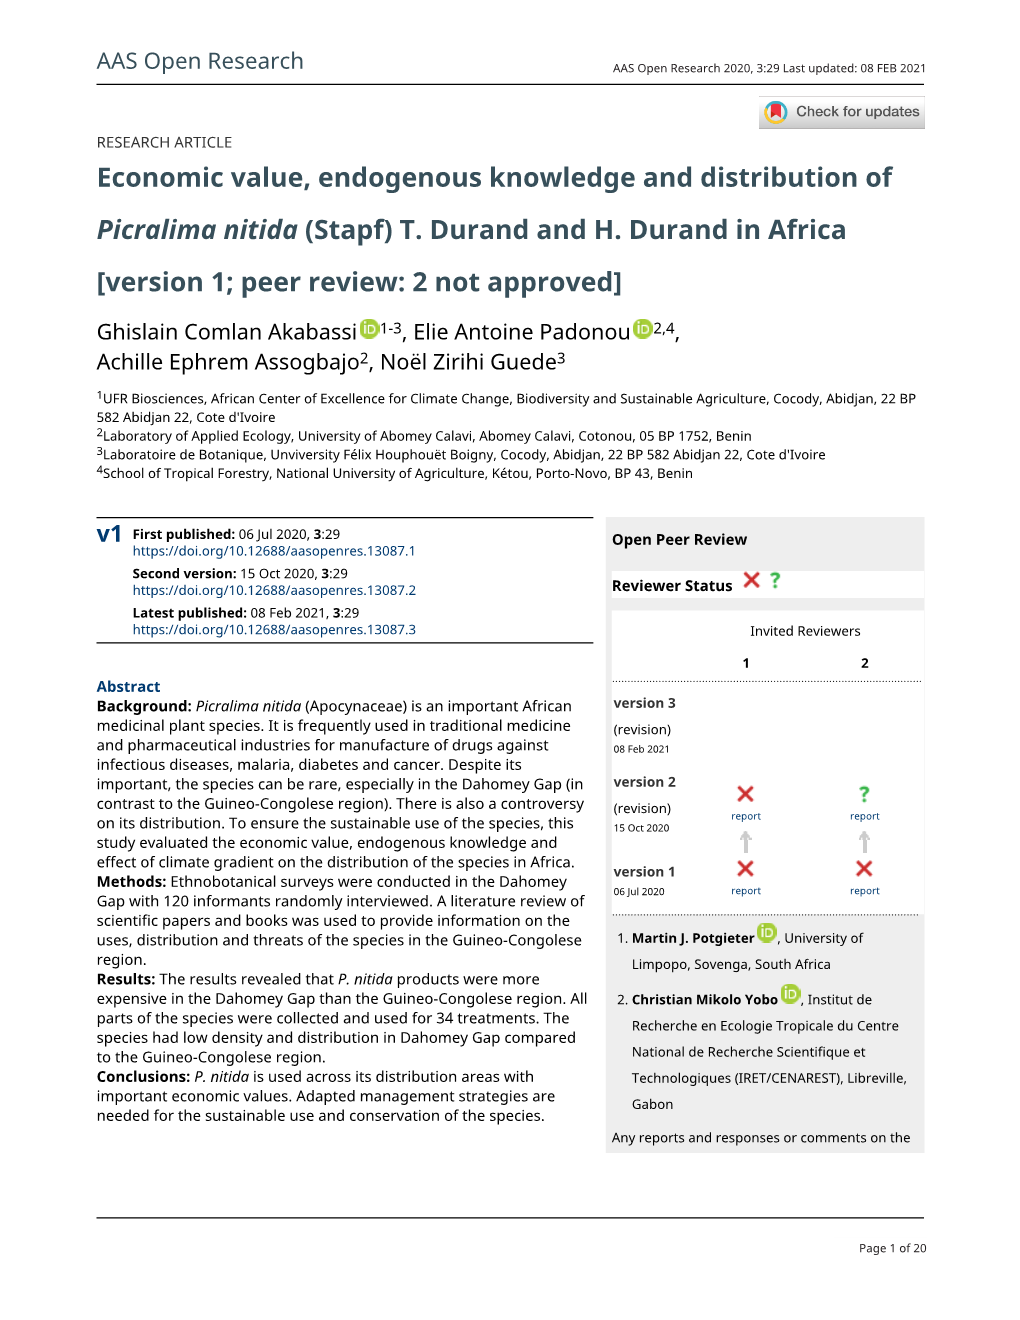 Economic Value, Endogenous Knowledge and Distribution Of